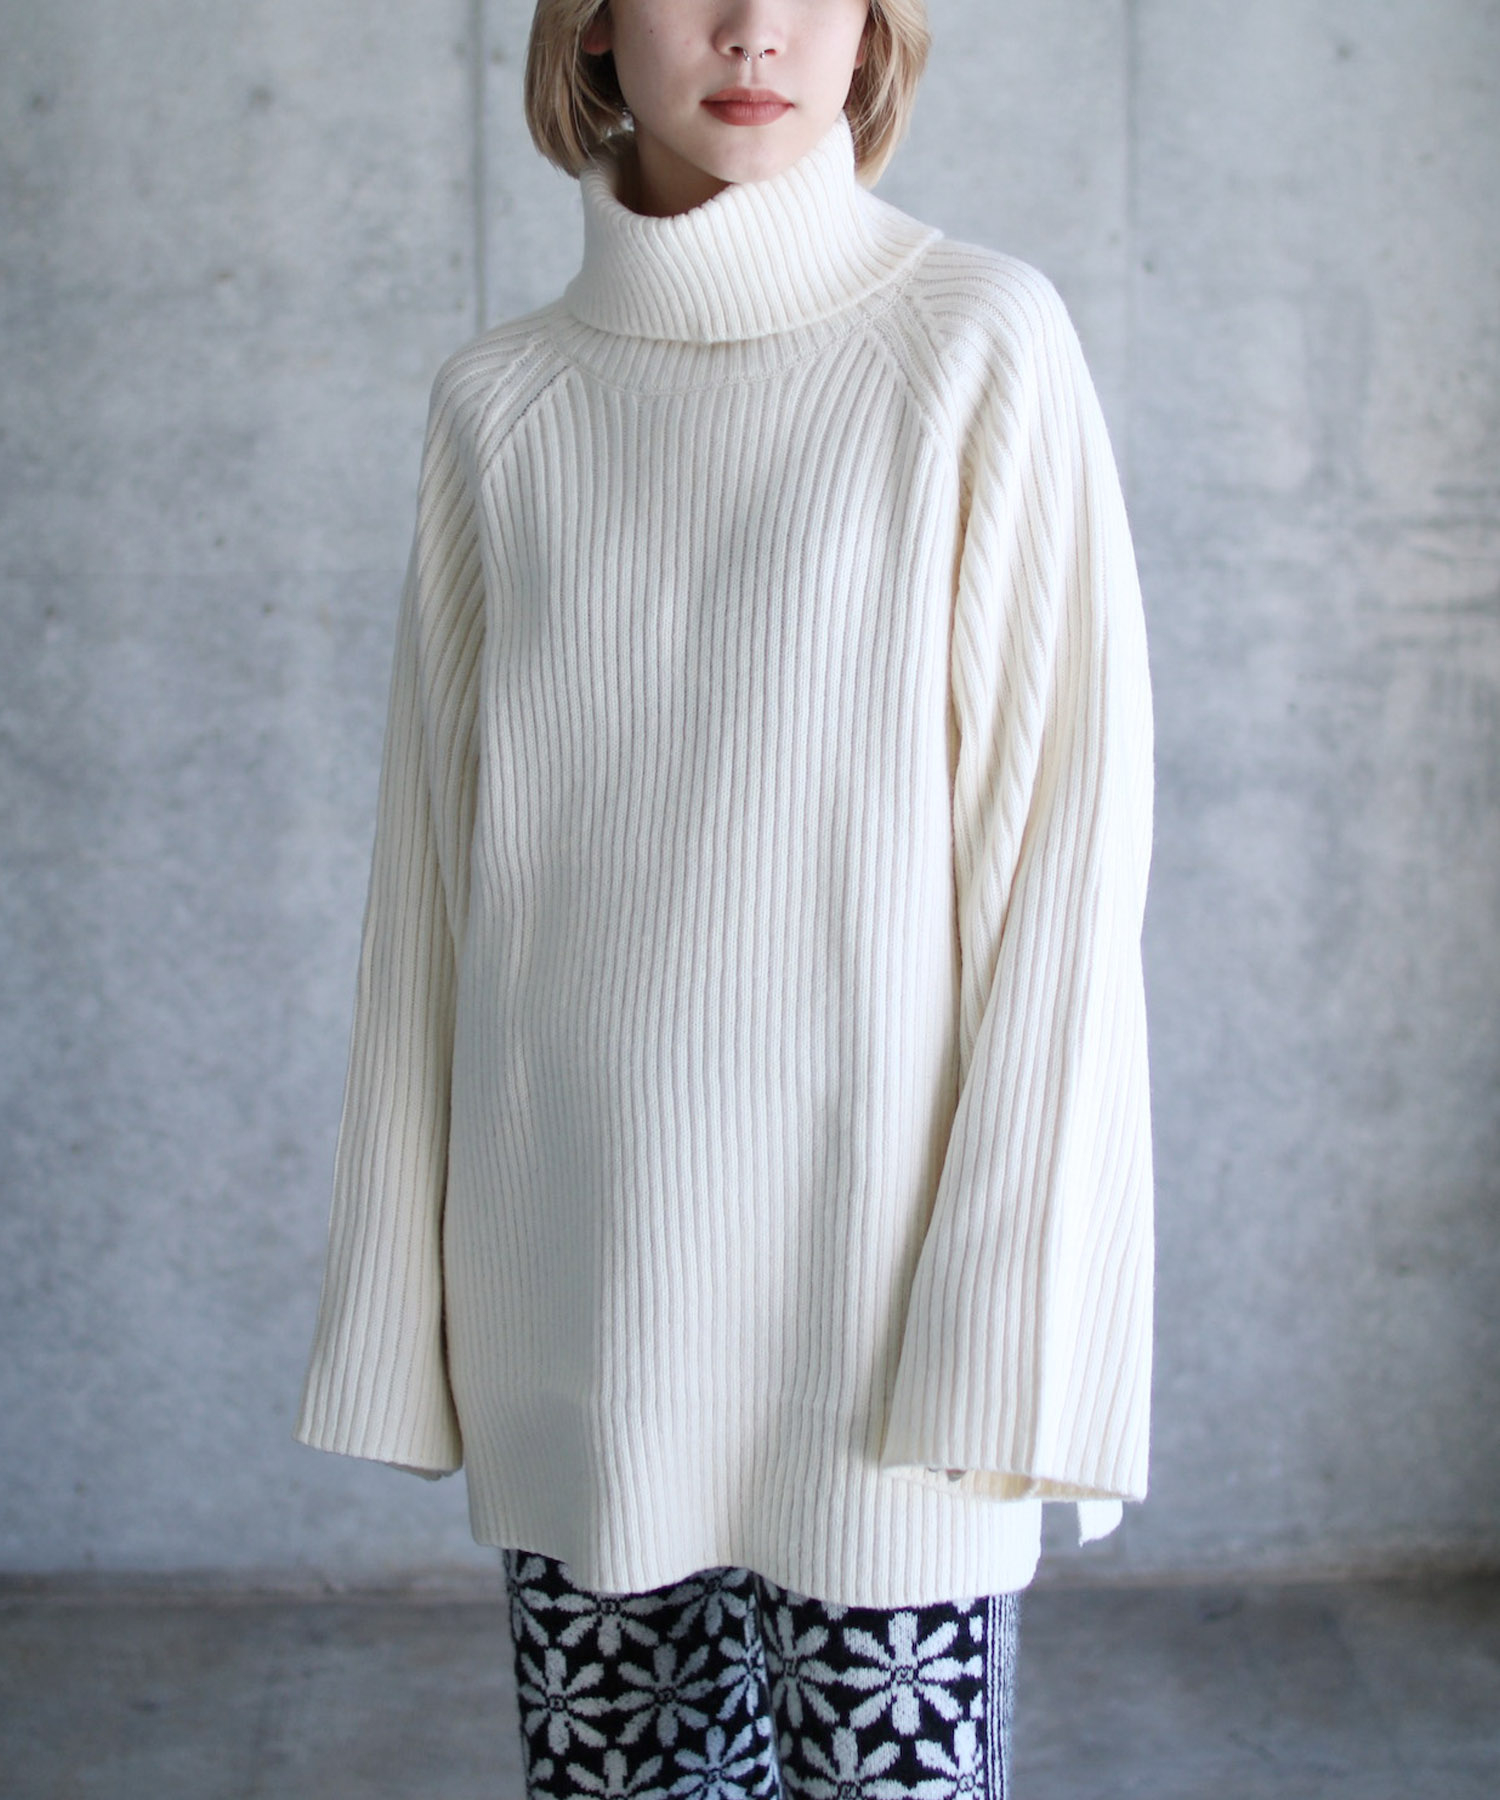 Roll-neck knitted sweater